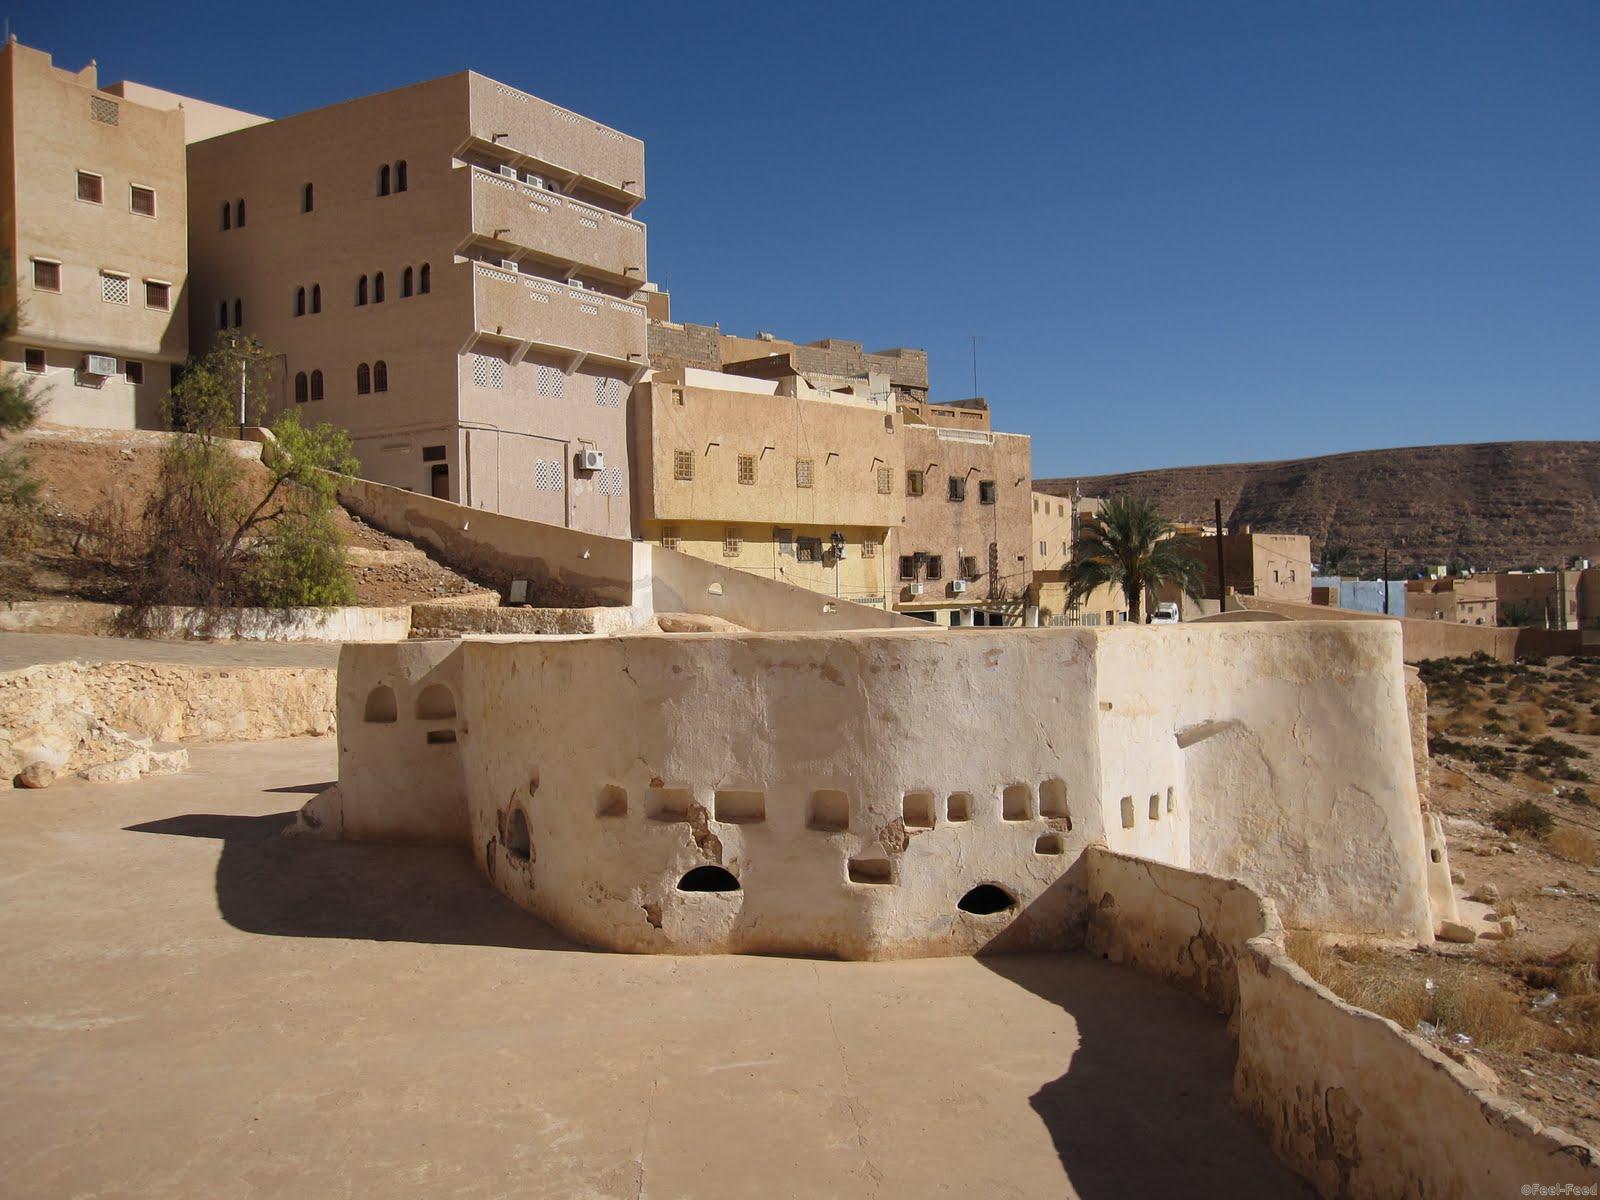 Mosque of Sidi Brahim, 14th-century, inspiration for 20th-century modernist architects such as Le Corbusier